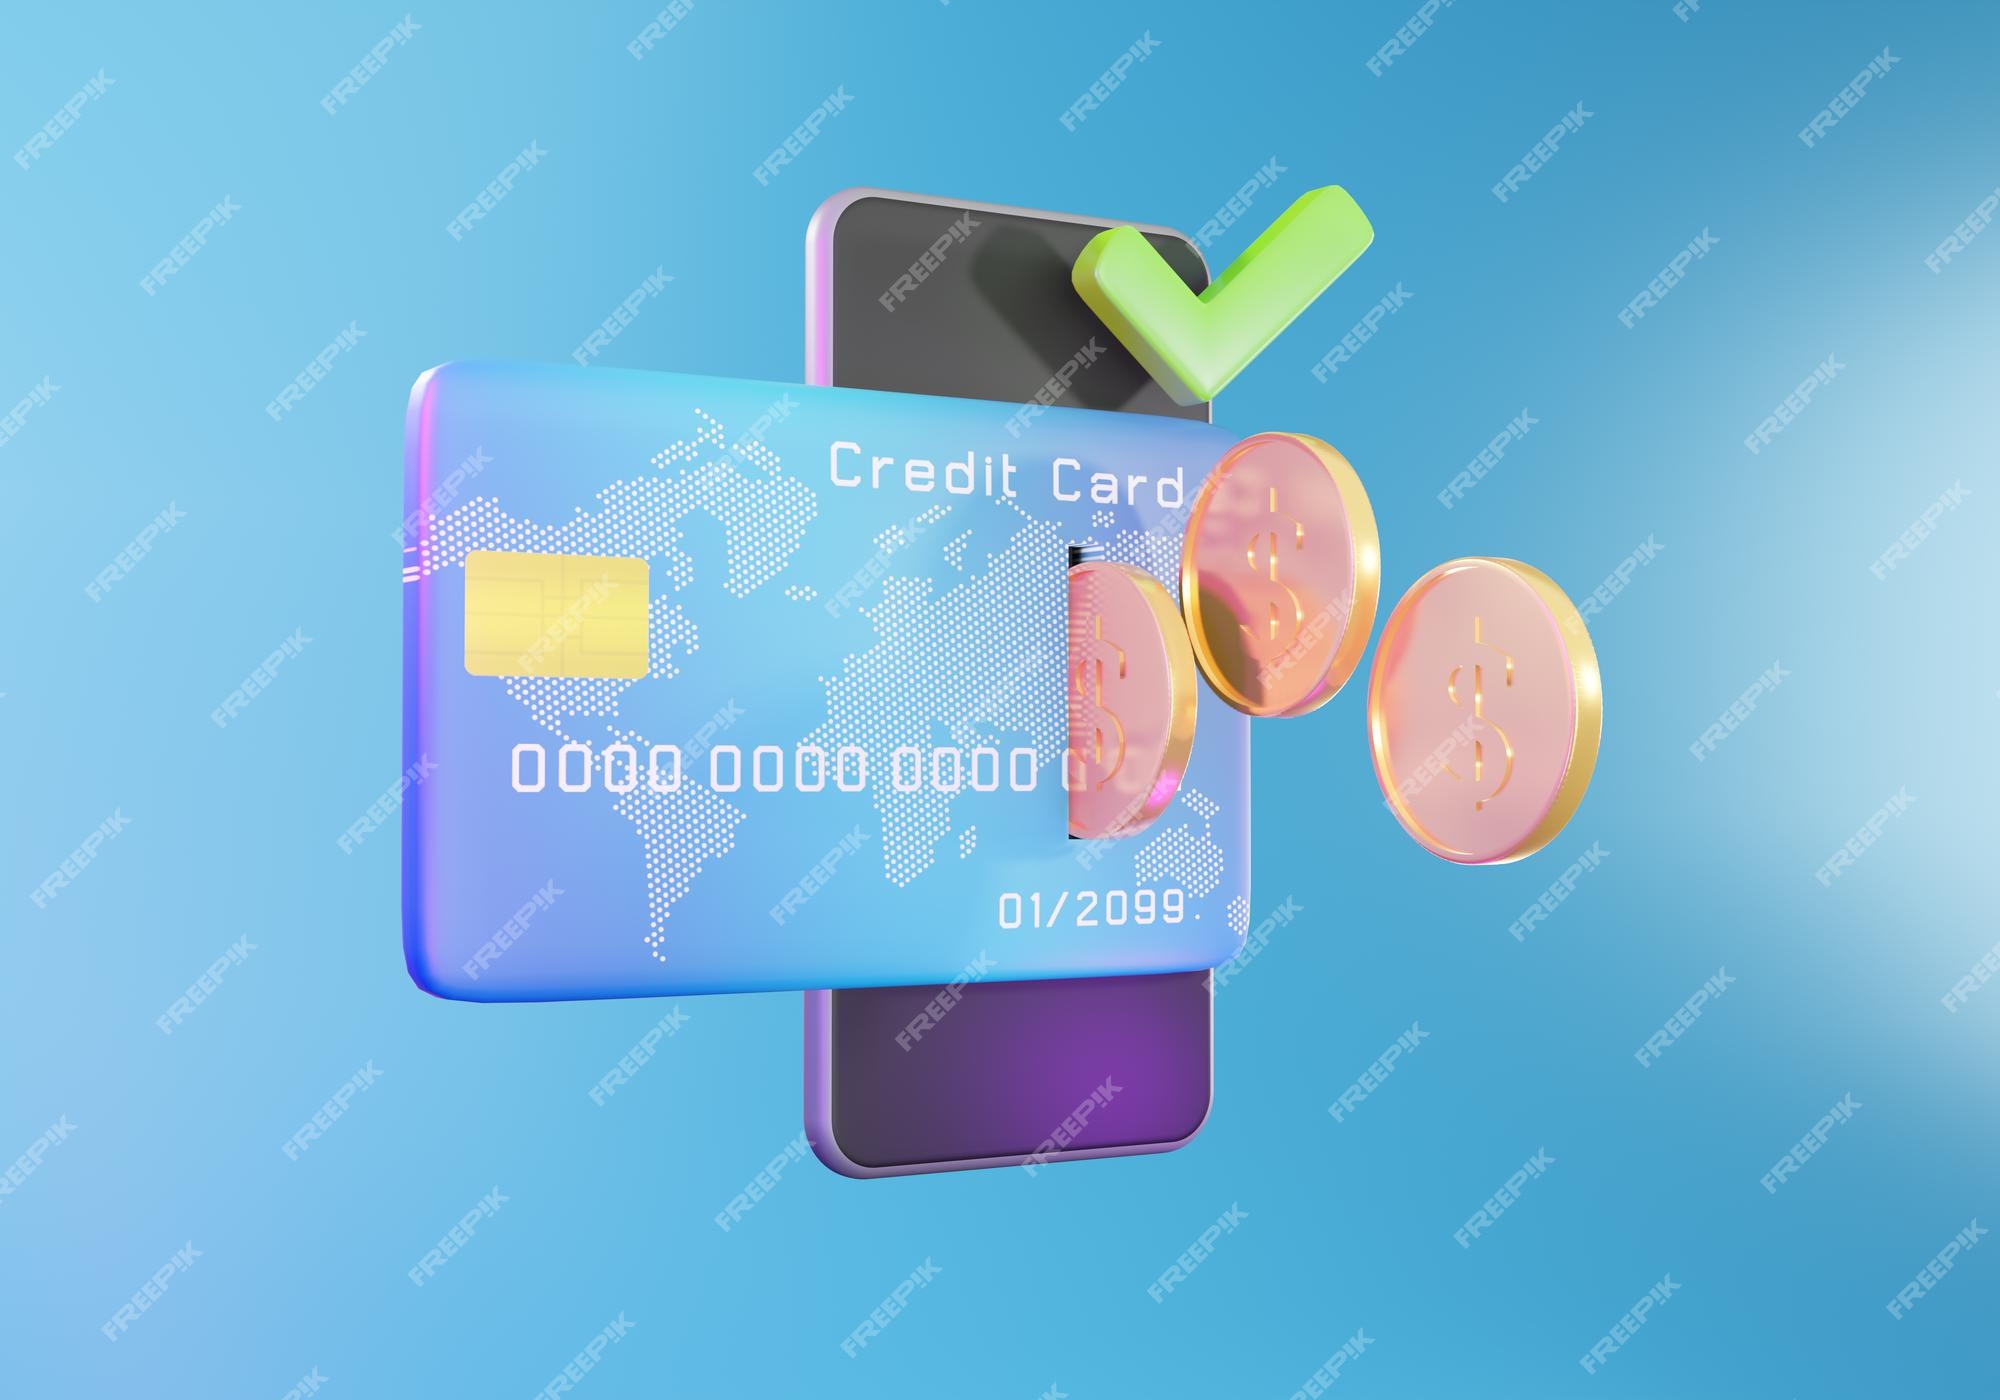 Premium Photo | Online credit card payment concept. secure online payment, payment and mobile banking concept, protection money transfer, 3d illustration